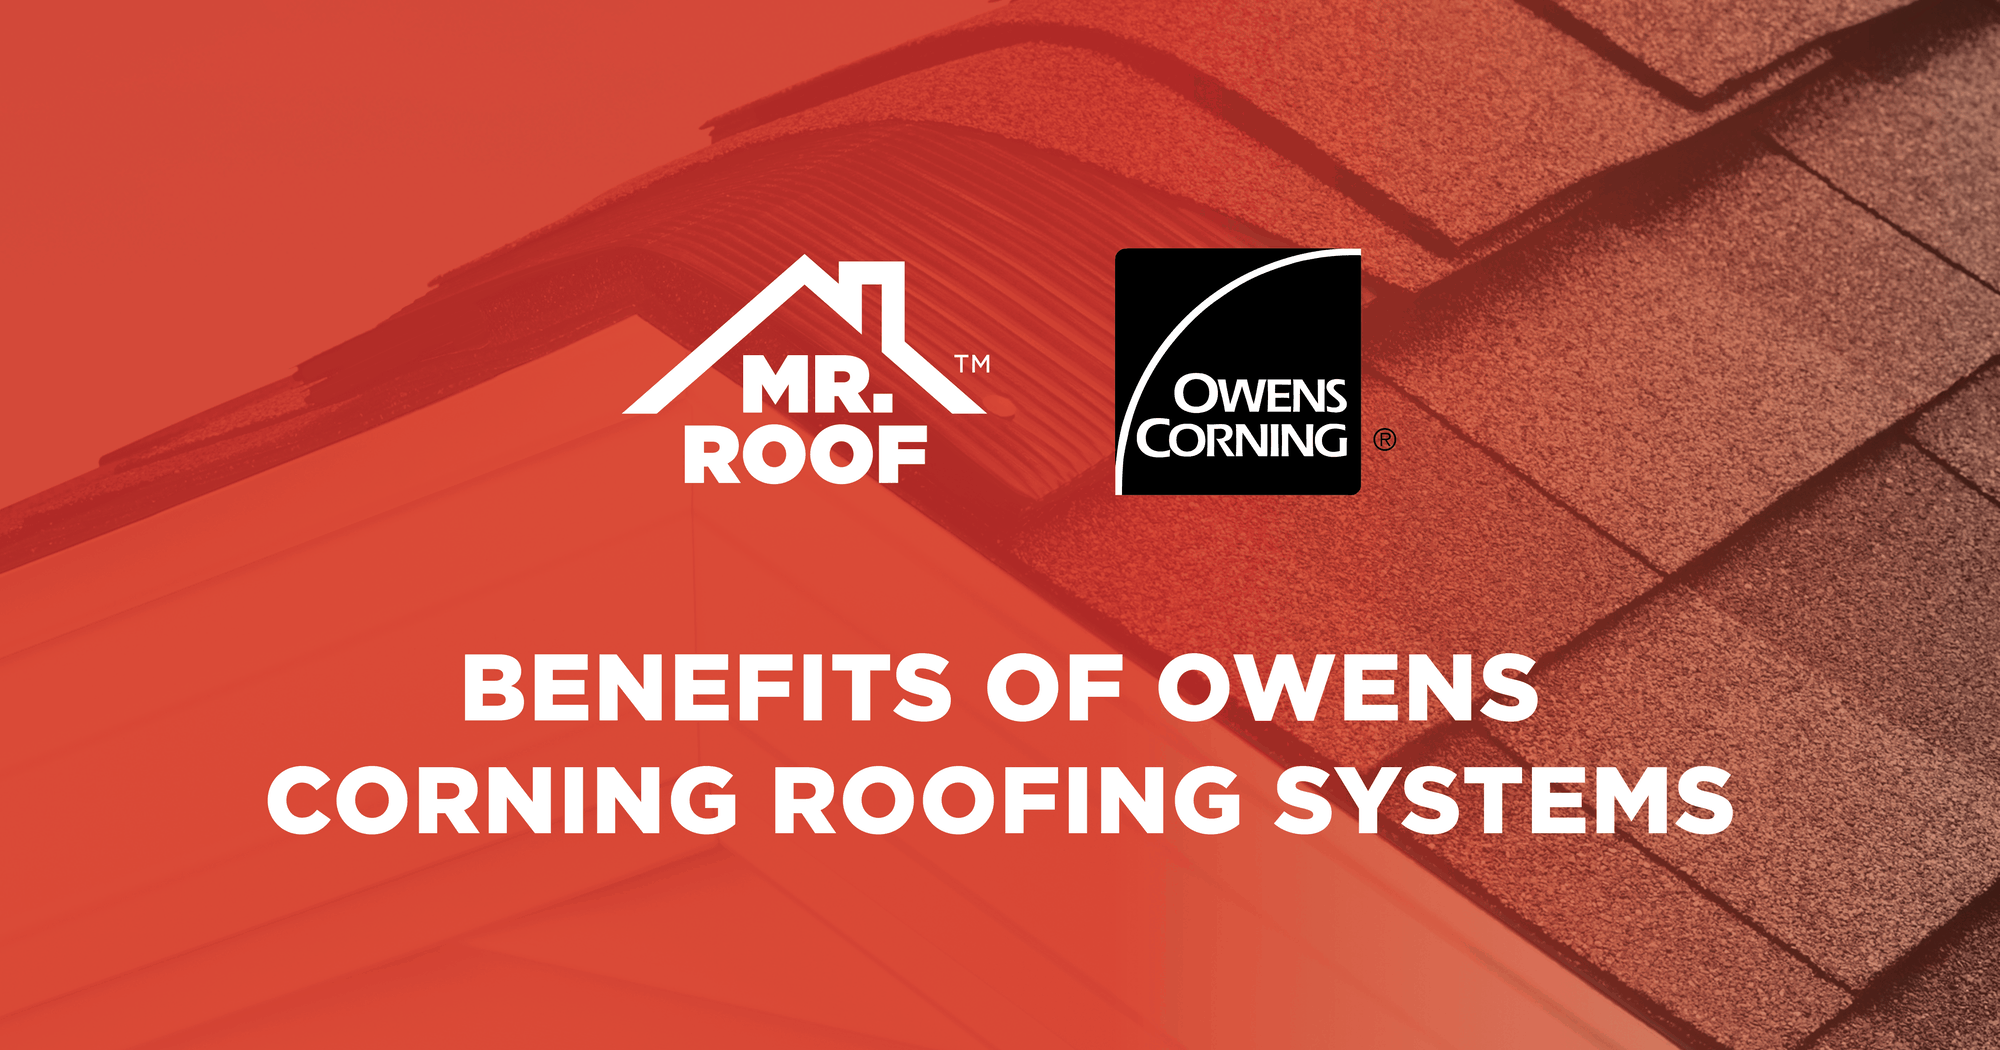 benefits-of-owens-corning-roofing-systems-mr-roof